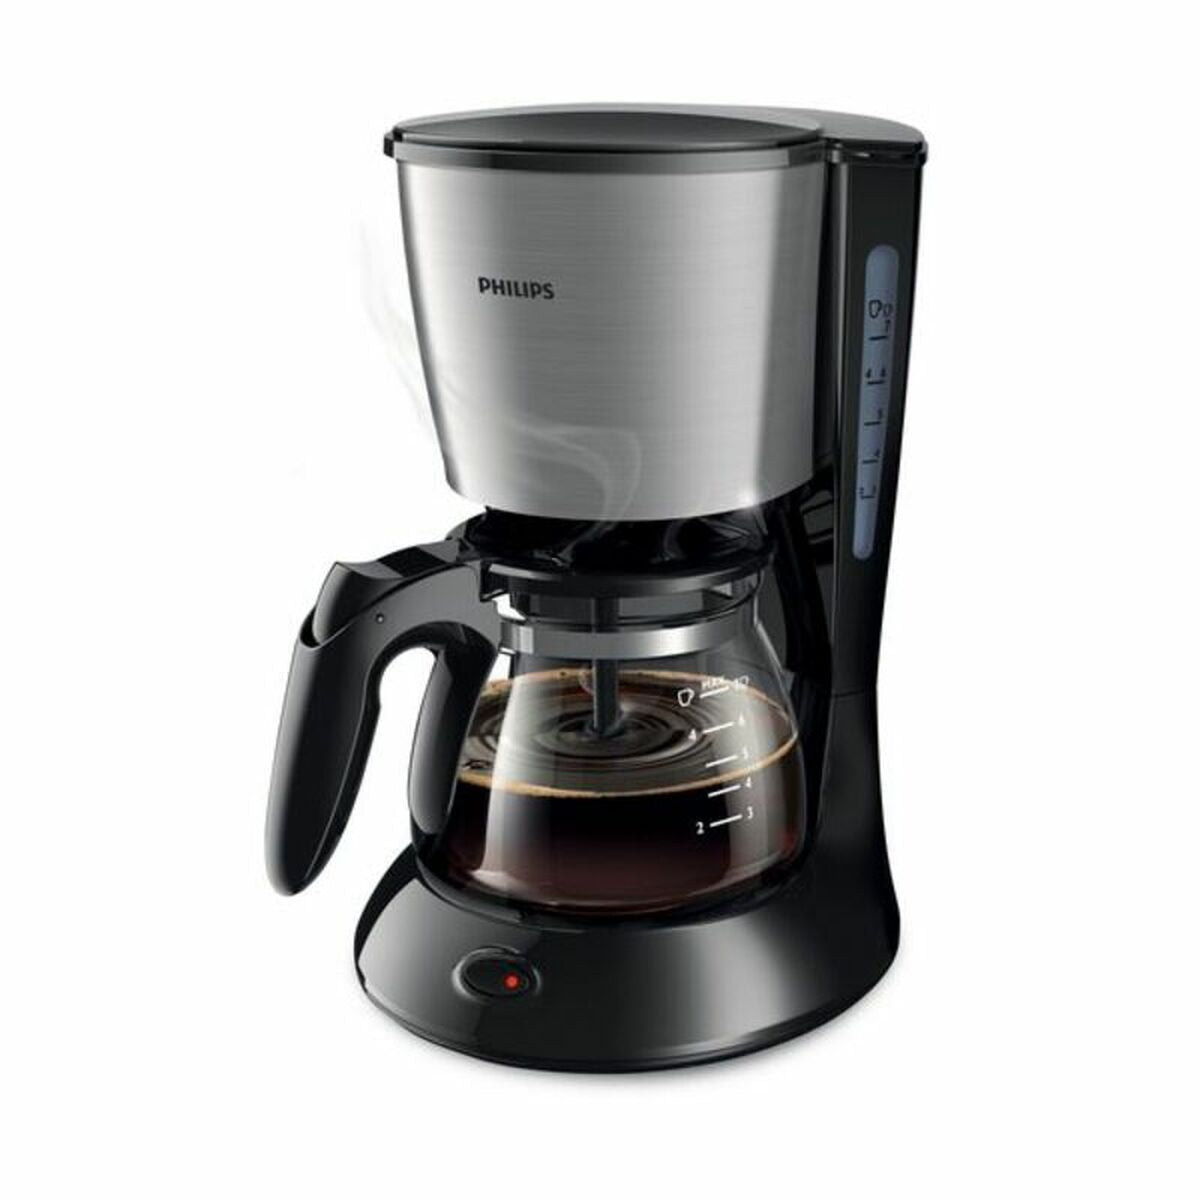 Cafetera eléctrica Philips Cafetera HD7435/20 700 W Negro 700 W 600